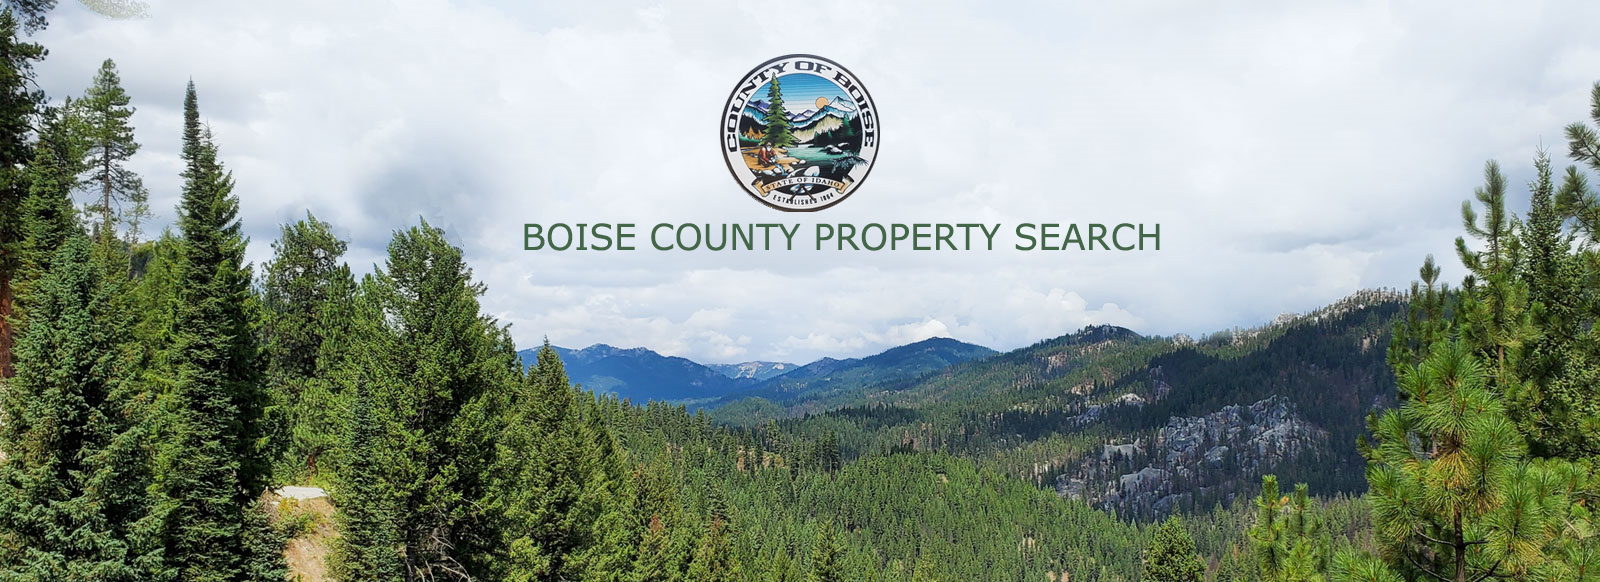 Boise County Property Search